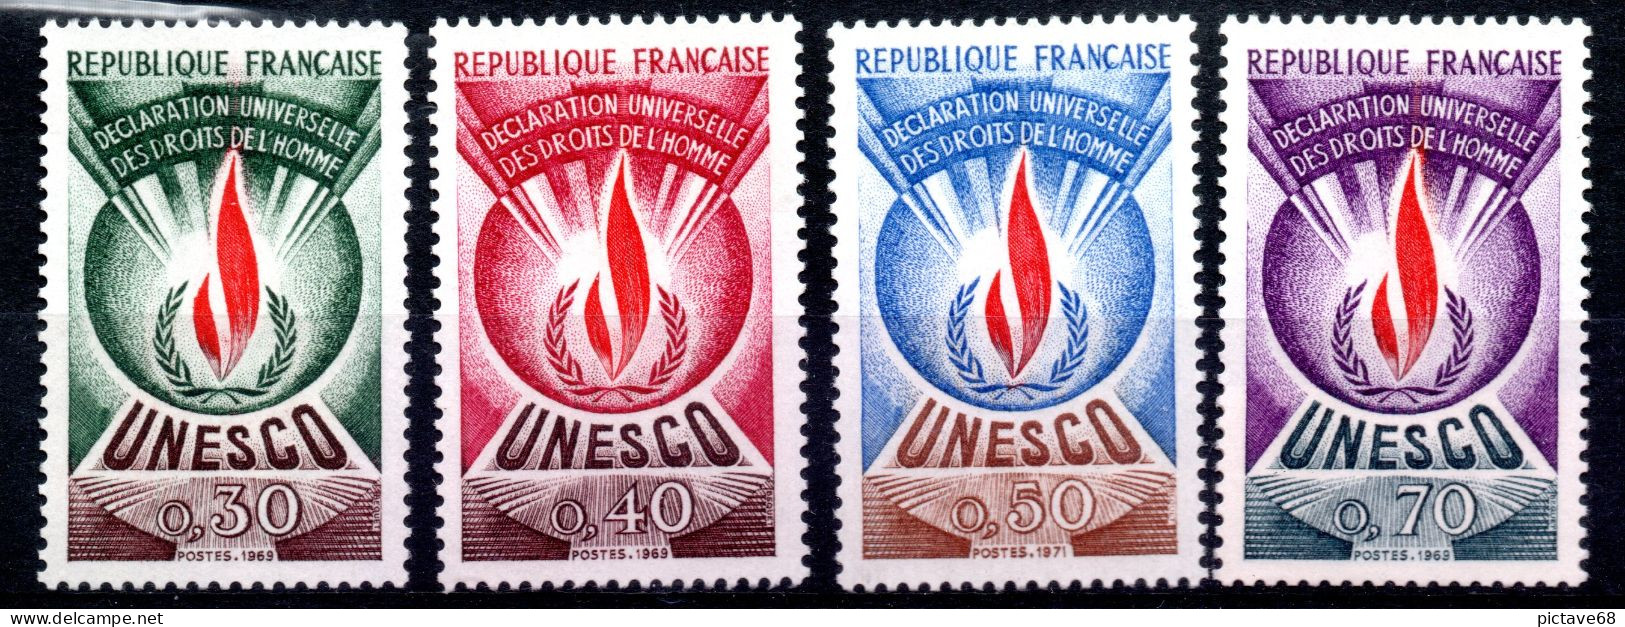 FRANCE / TIMBRES SERVICE/ N°39 à 42 UNESCO NEUF** - Neufs